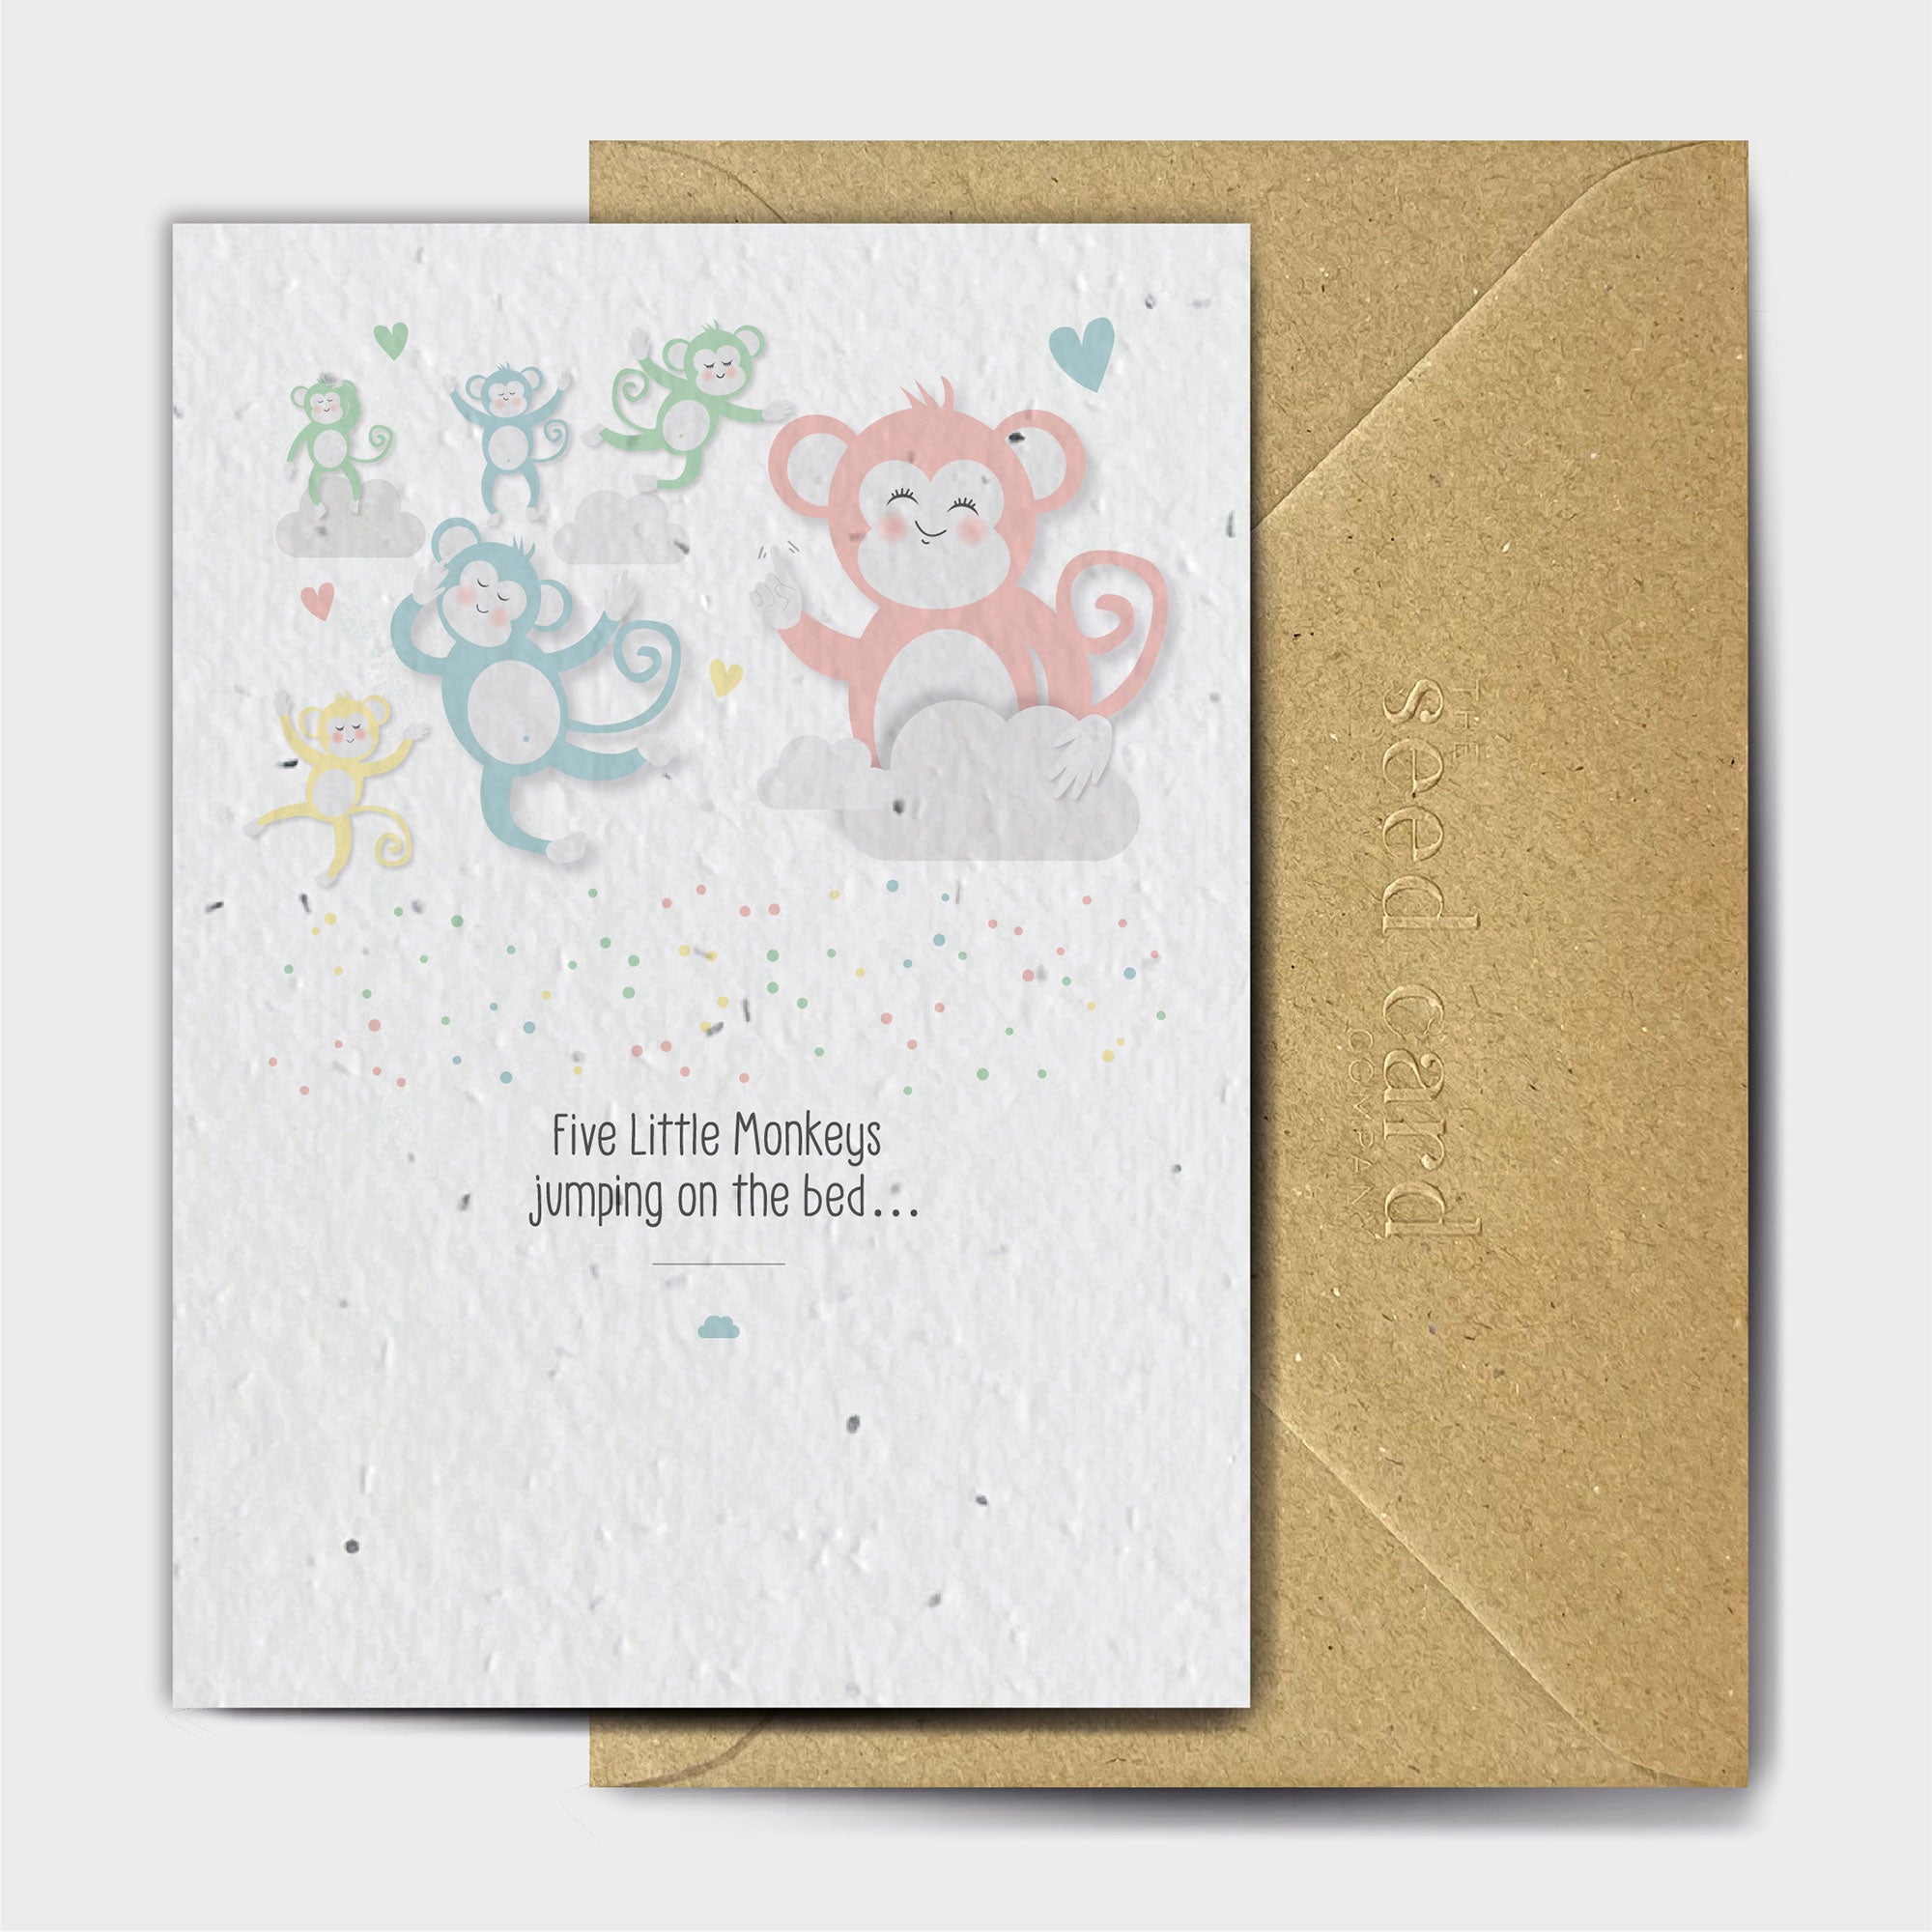 Shop online Five Little Monkies - 100% biodegradable seed-embedded cards Shop -The Seed Card Company